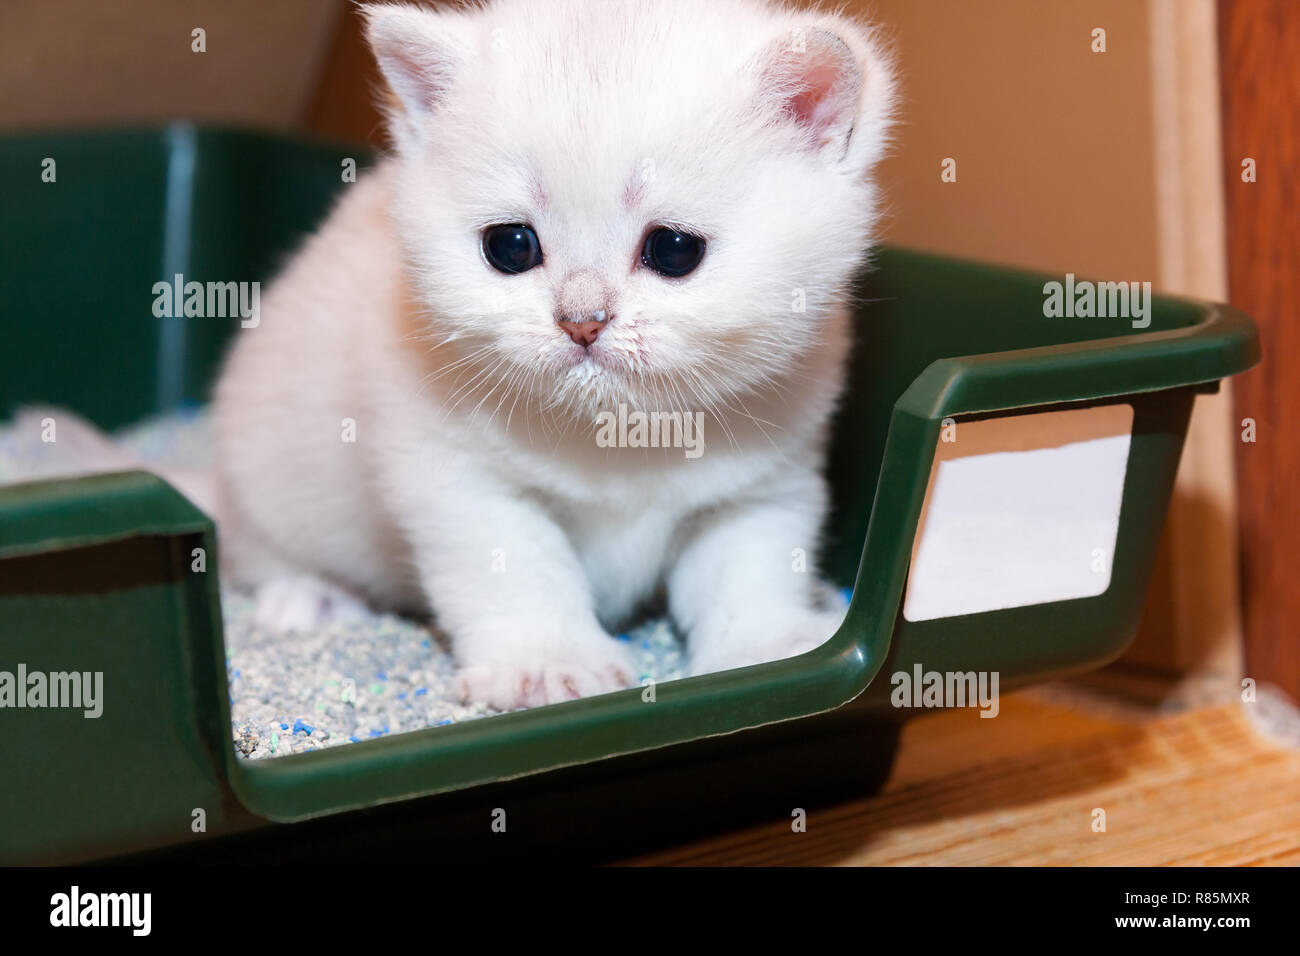 Tiny white British kitten sitting in a tray with cat litter, kitten muzzle stained with milk that he recently ate. Stock Photo